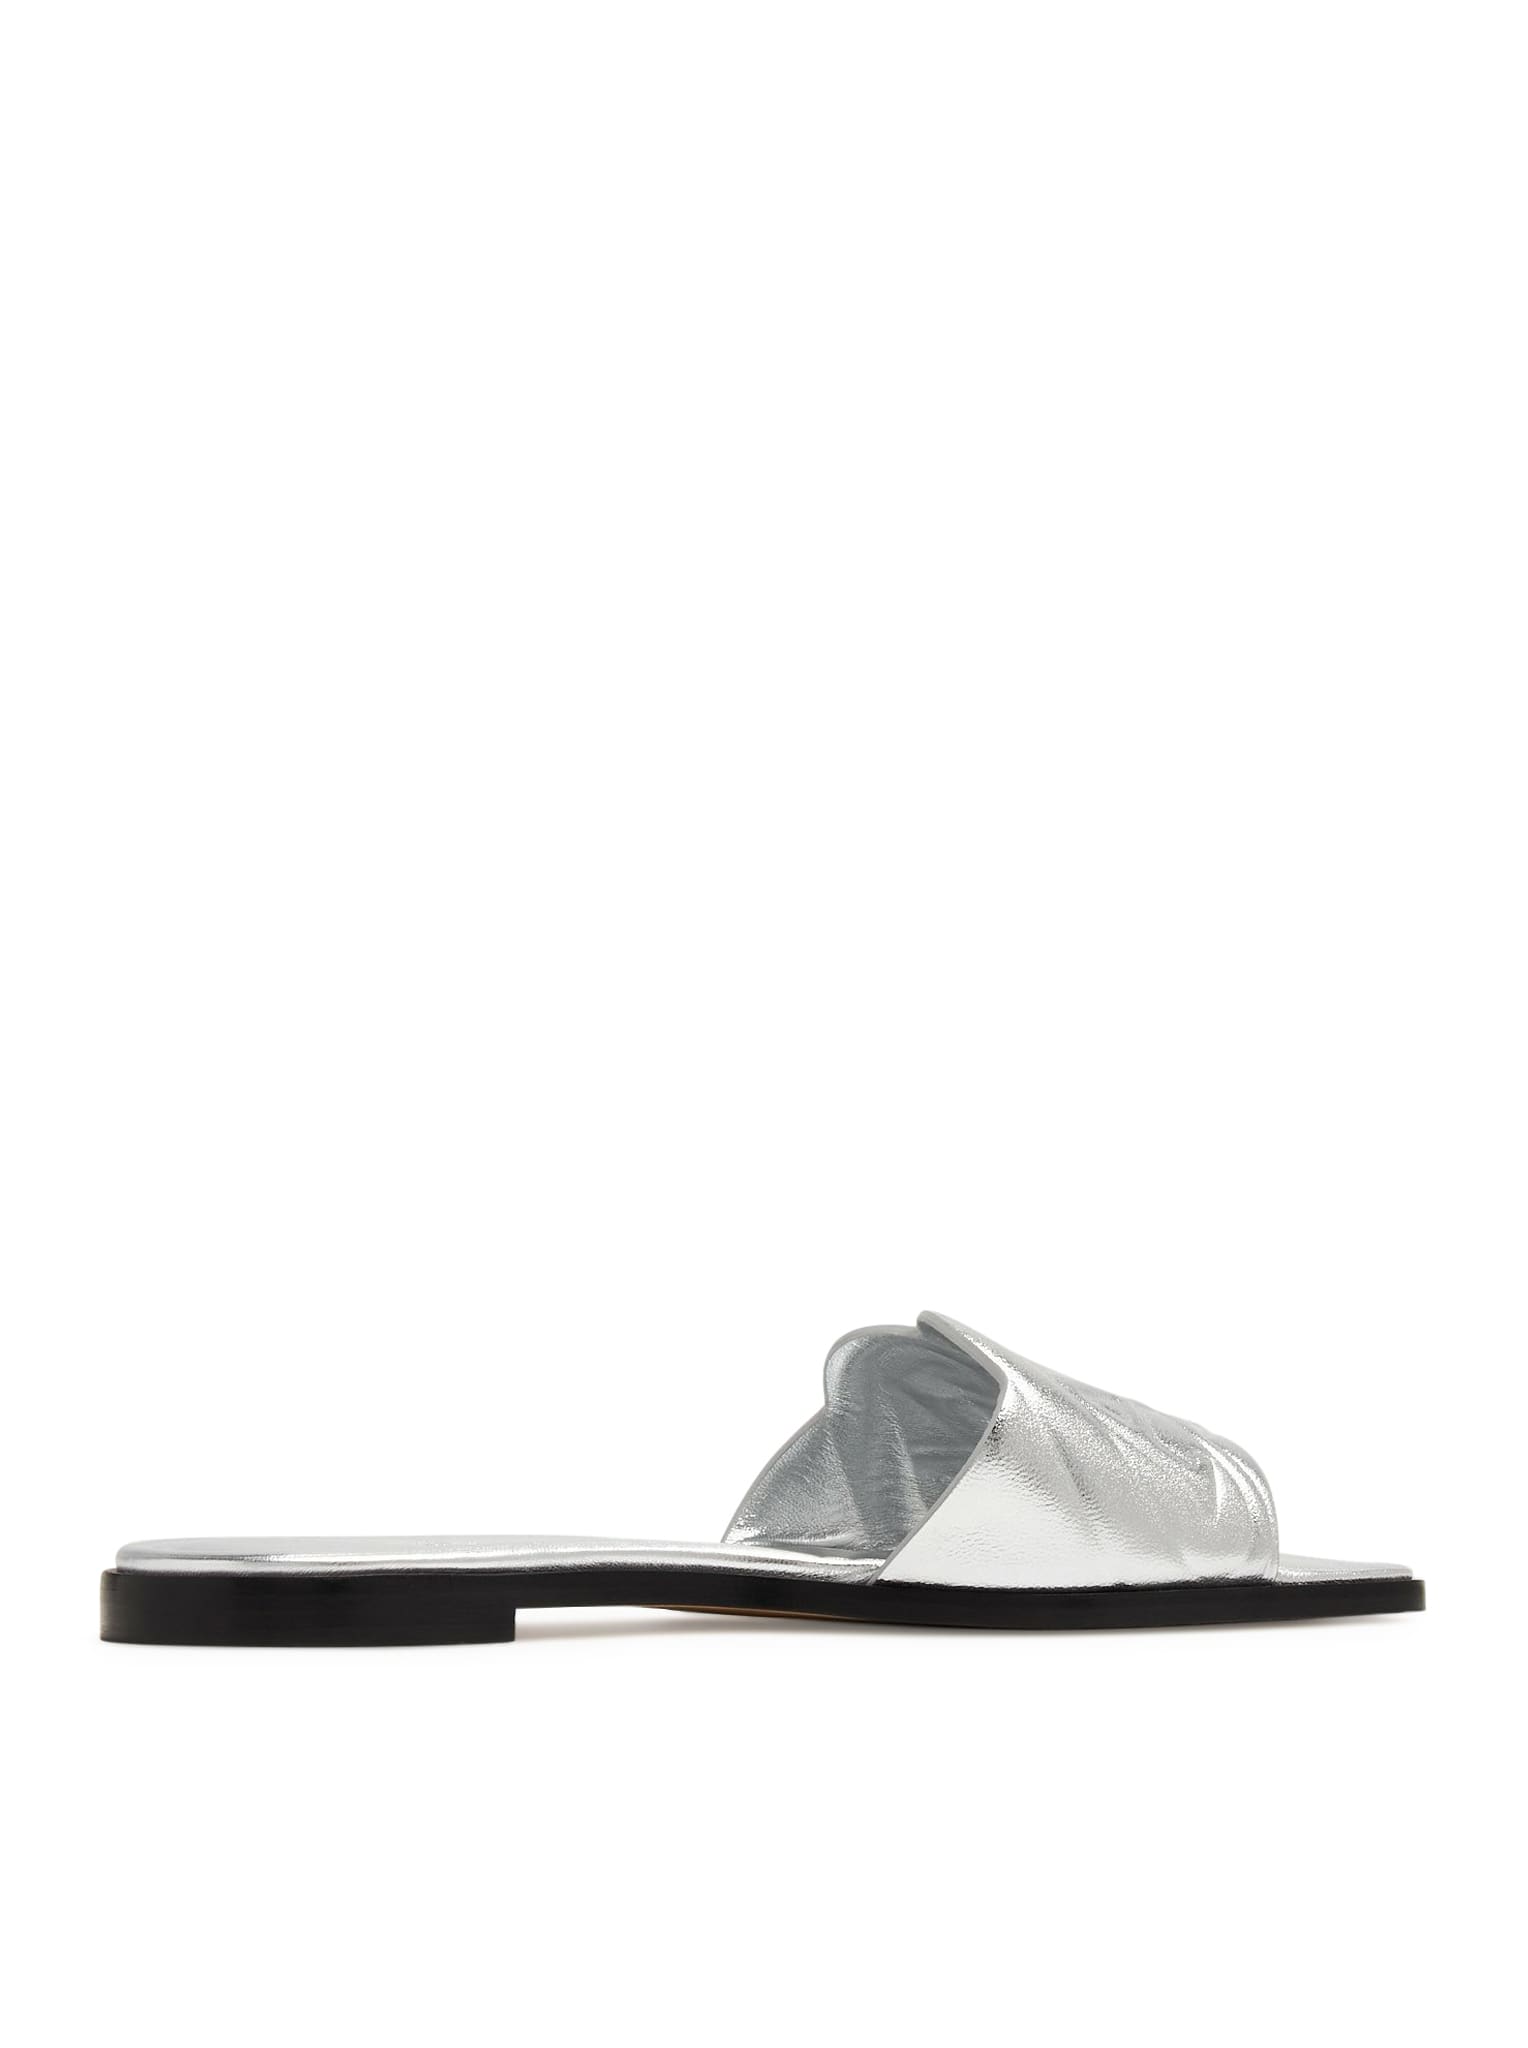 Shop Alexander Mcqueen Sandal Leath S.rubb. Silk Leather/high Frequency In Silver